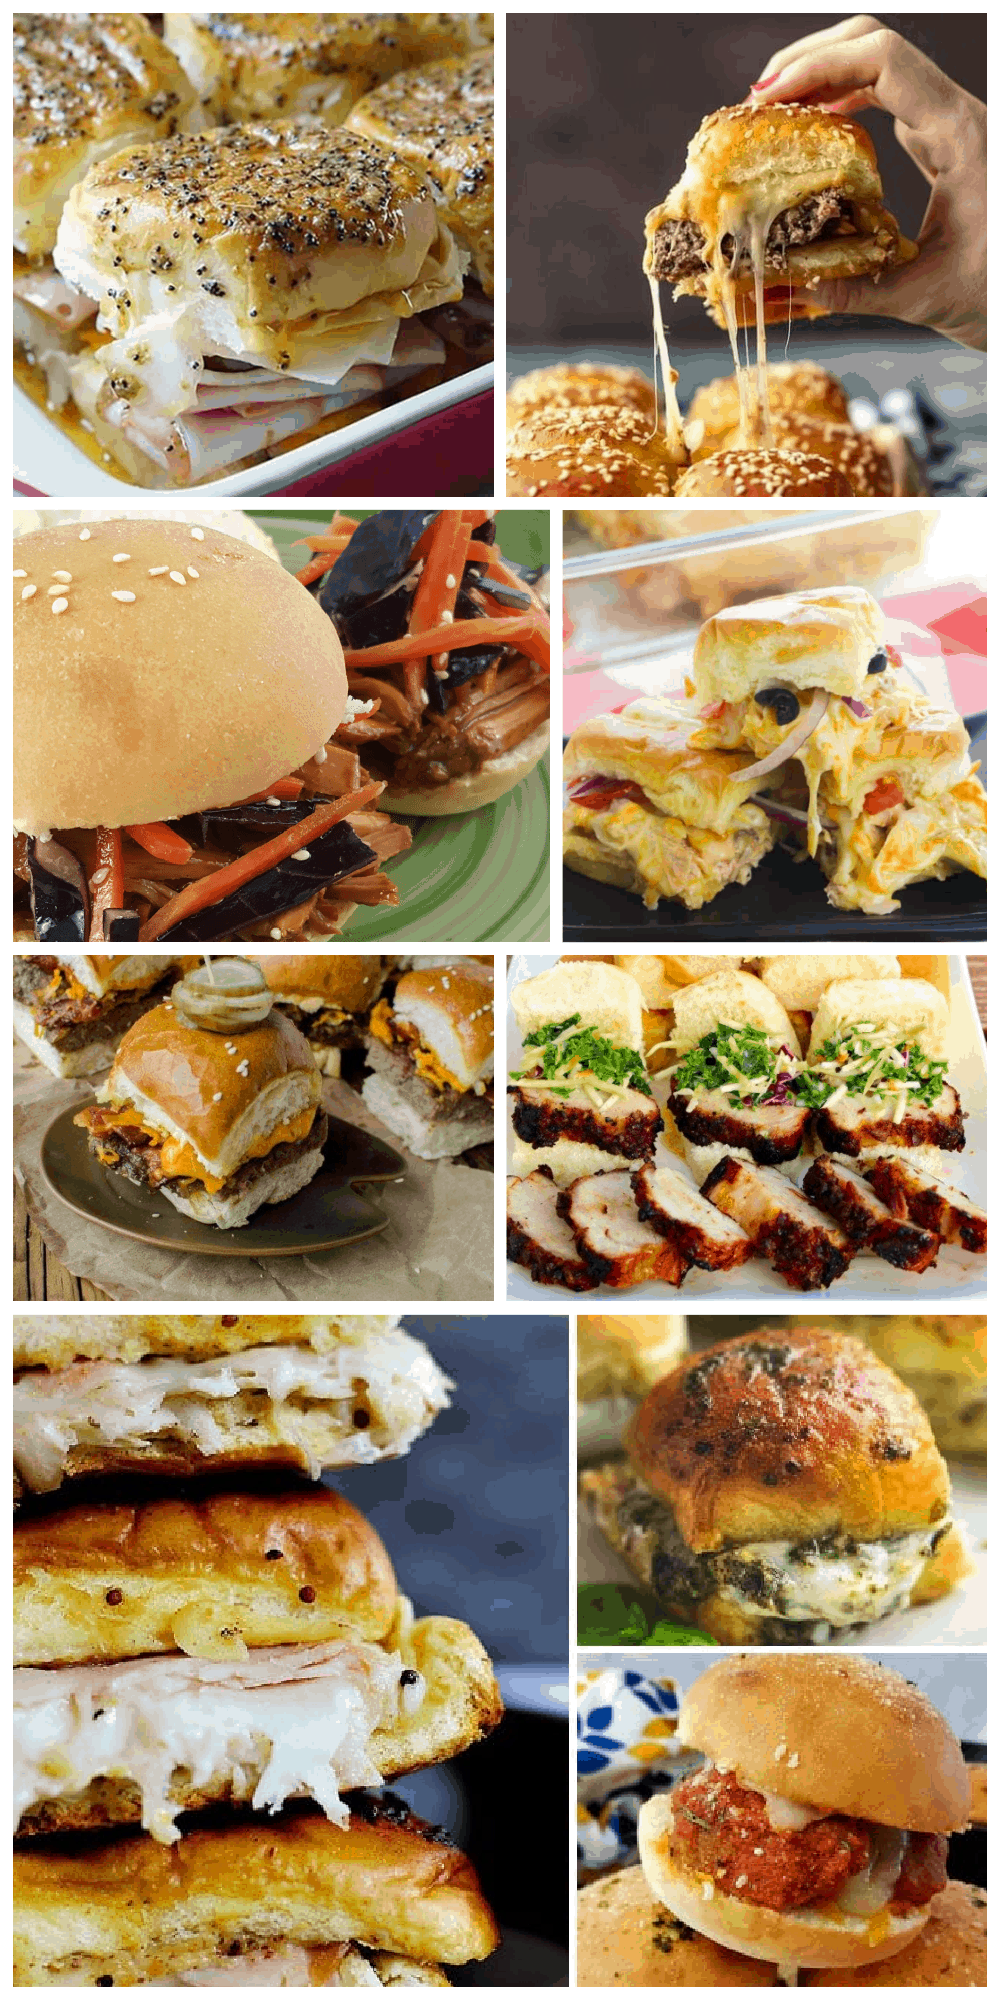 Slider recipes are perfect for feeding a crowd. From traditional sliders like burgers, ham, and turkey to more creative options, you'll find something here! via @jugglingactmama